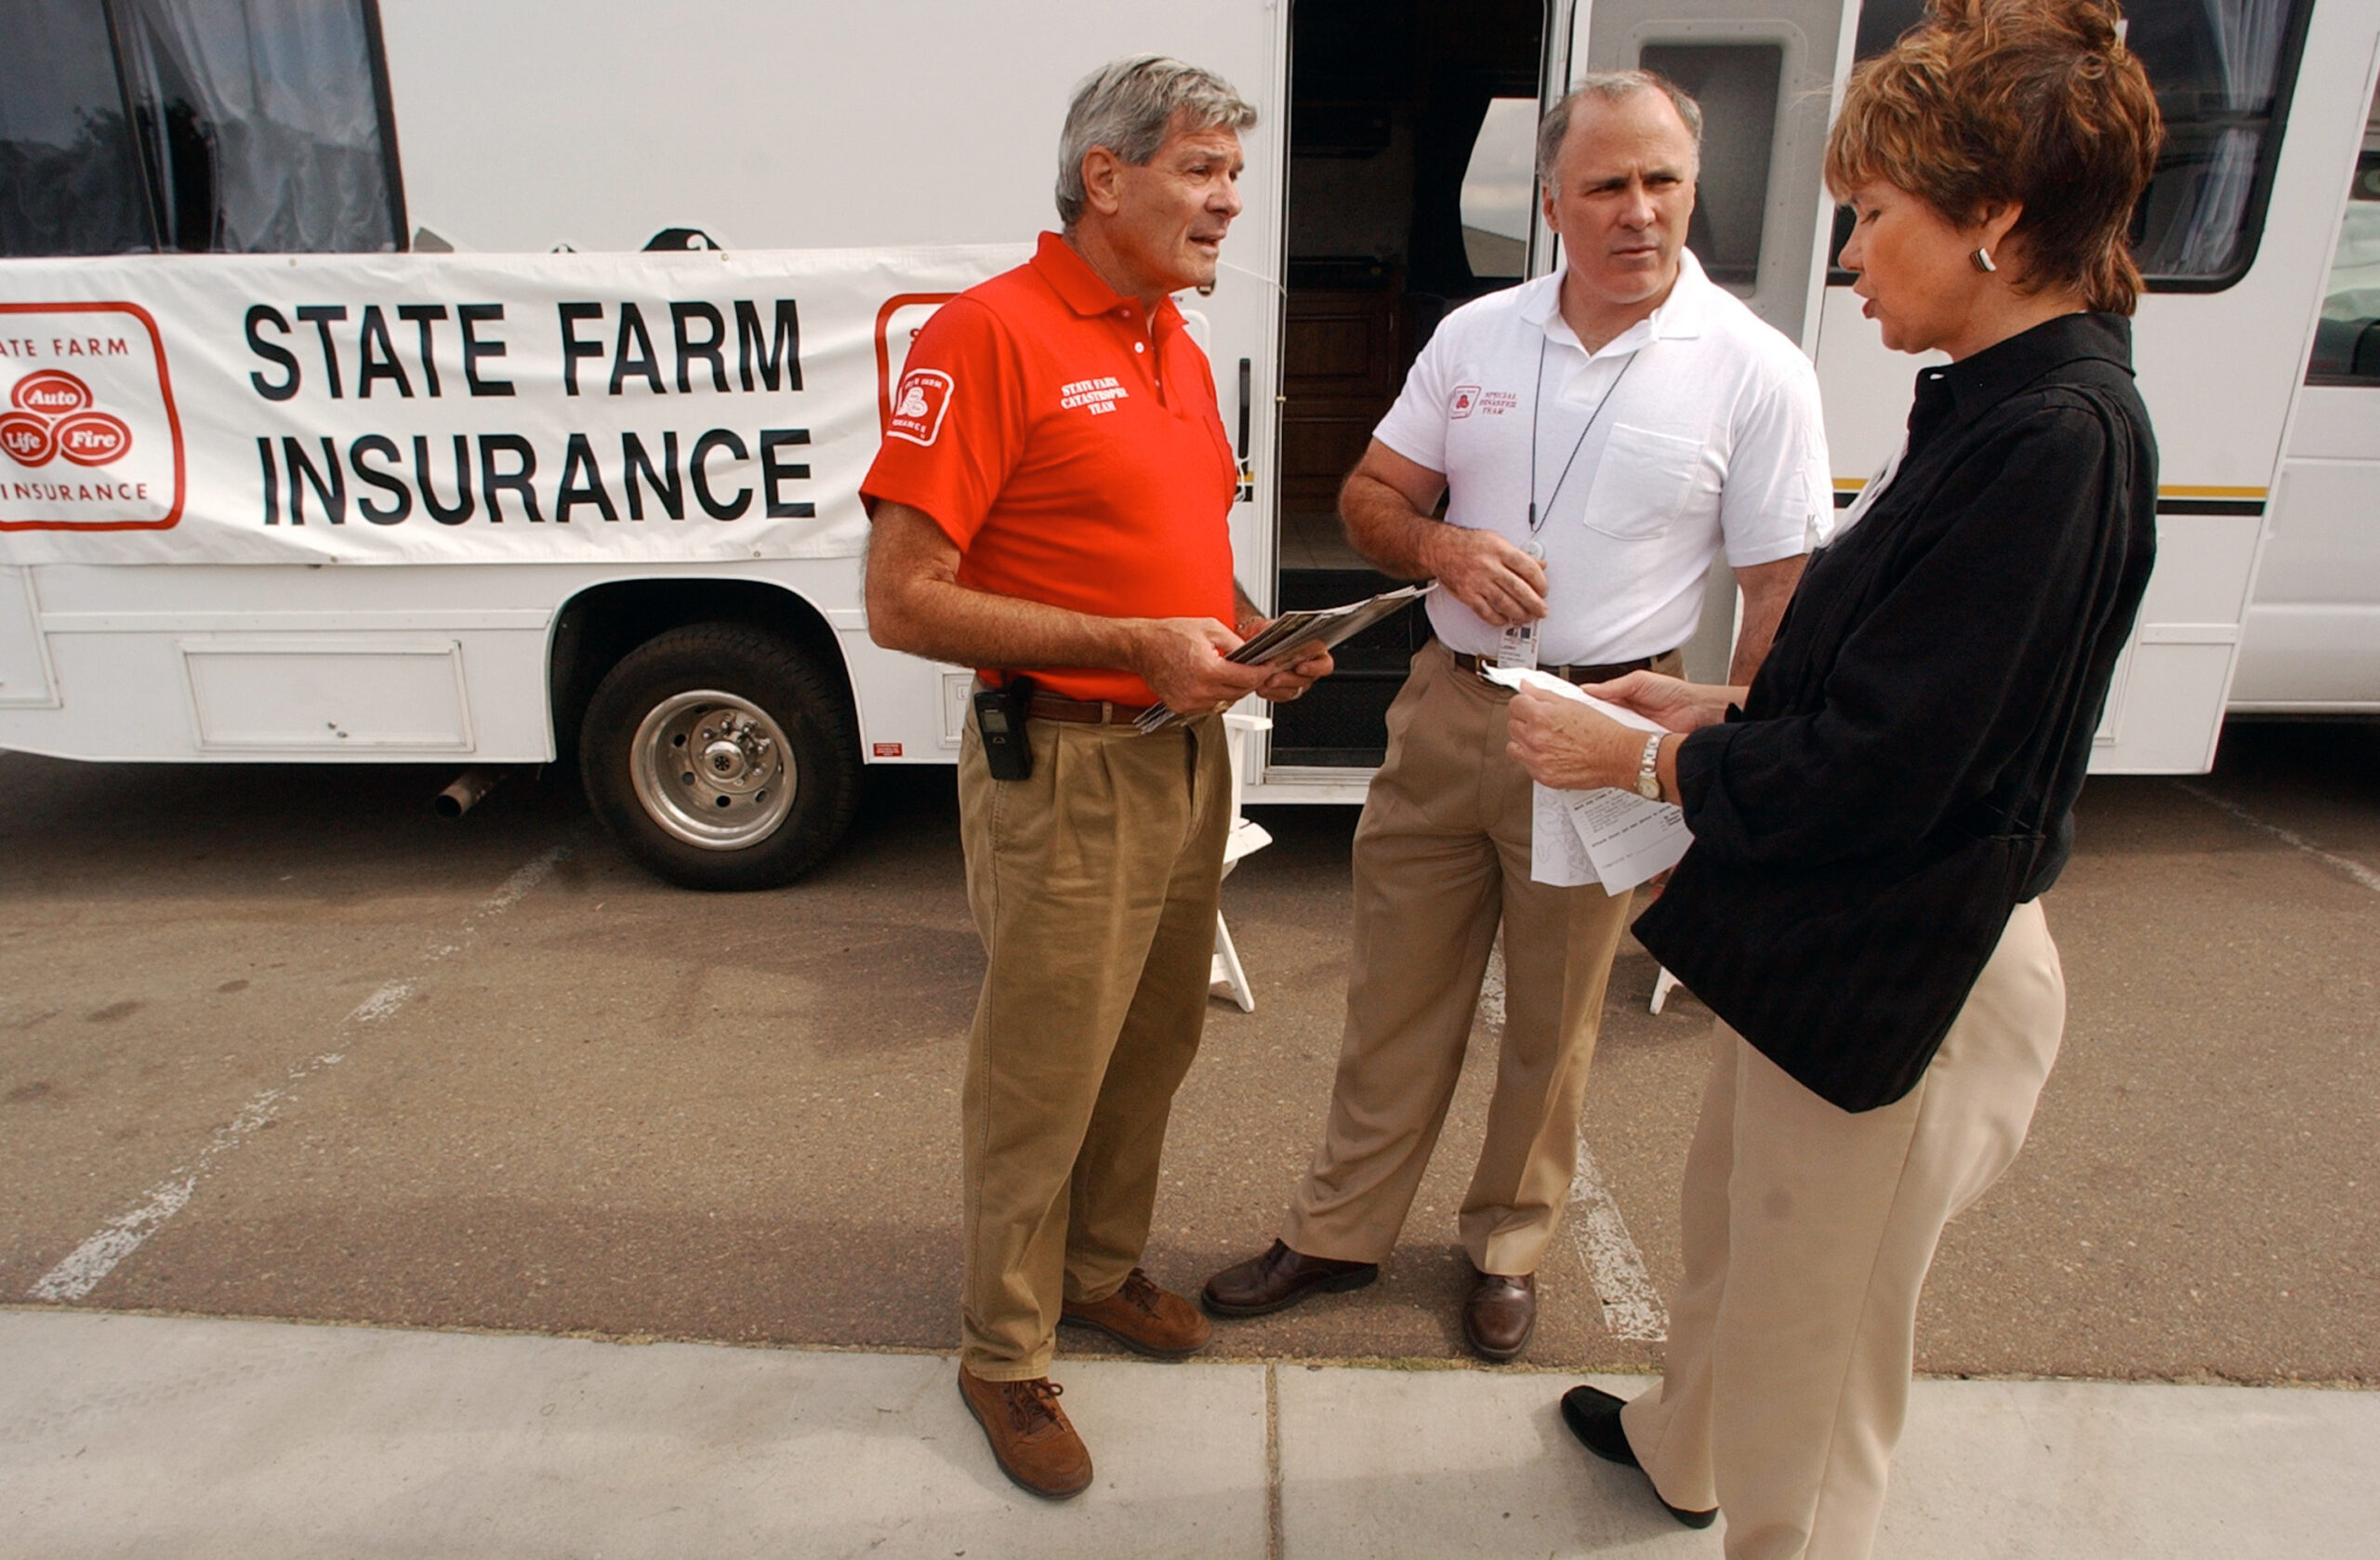 Two men in State Farm insurance shirts speak to woman in front of State Farm vehicle